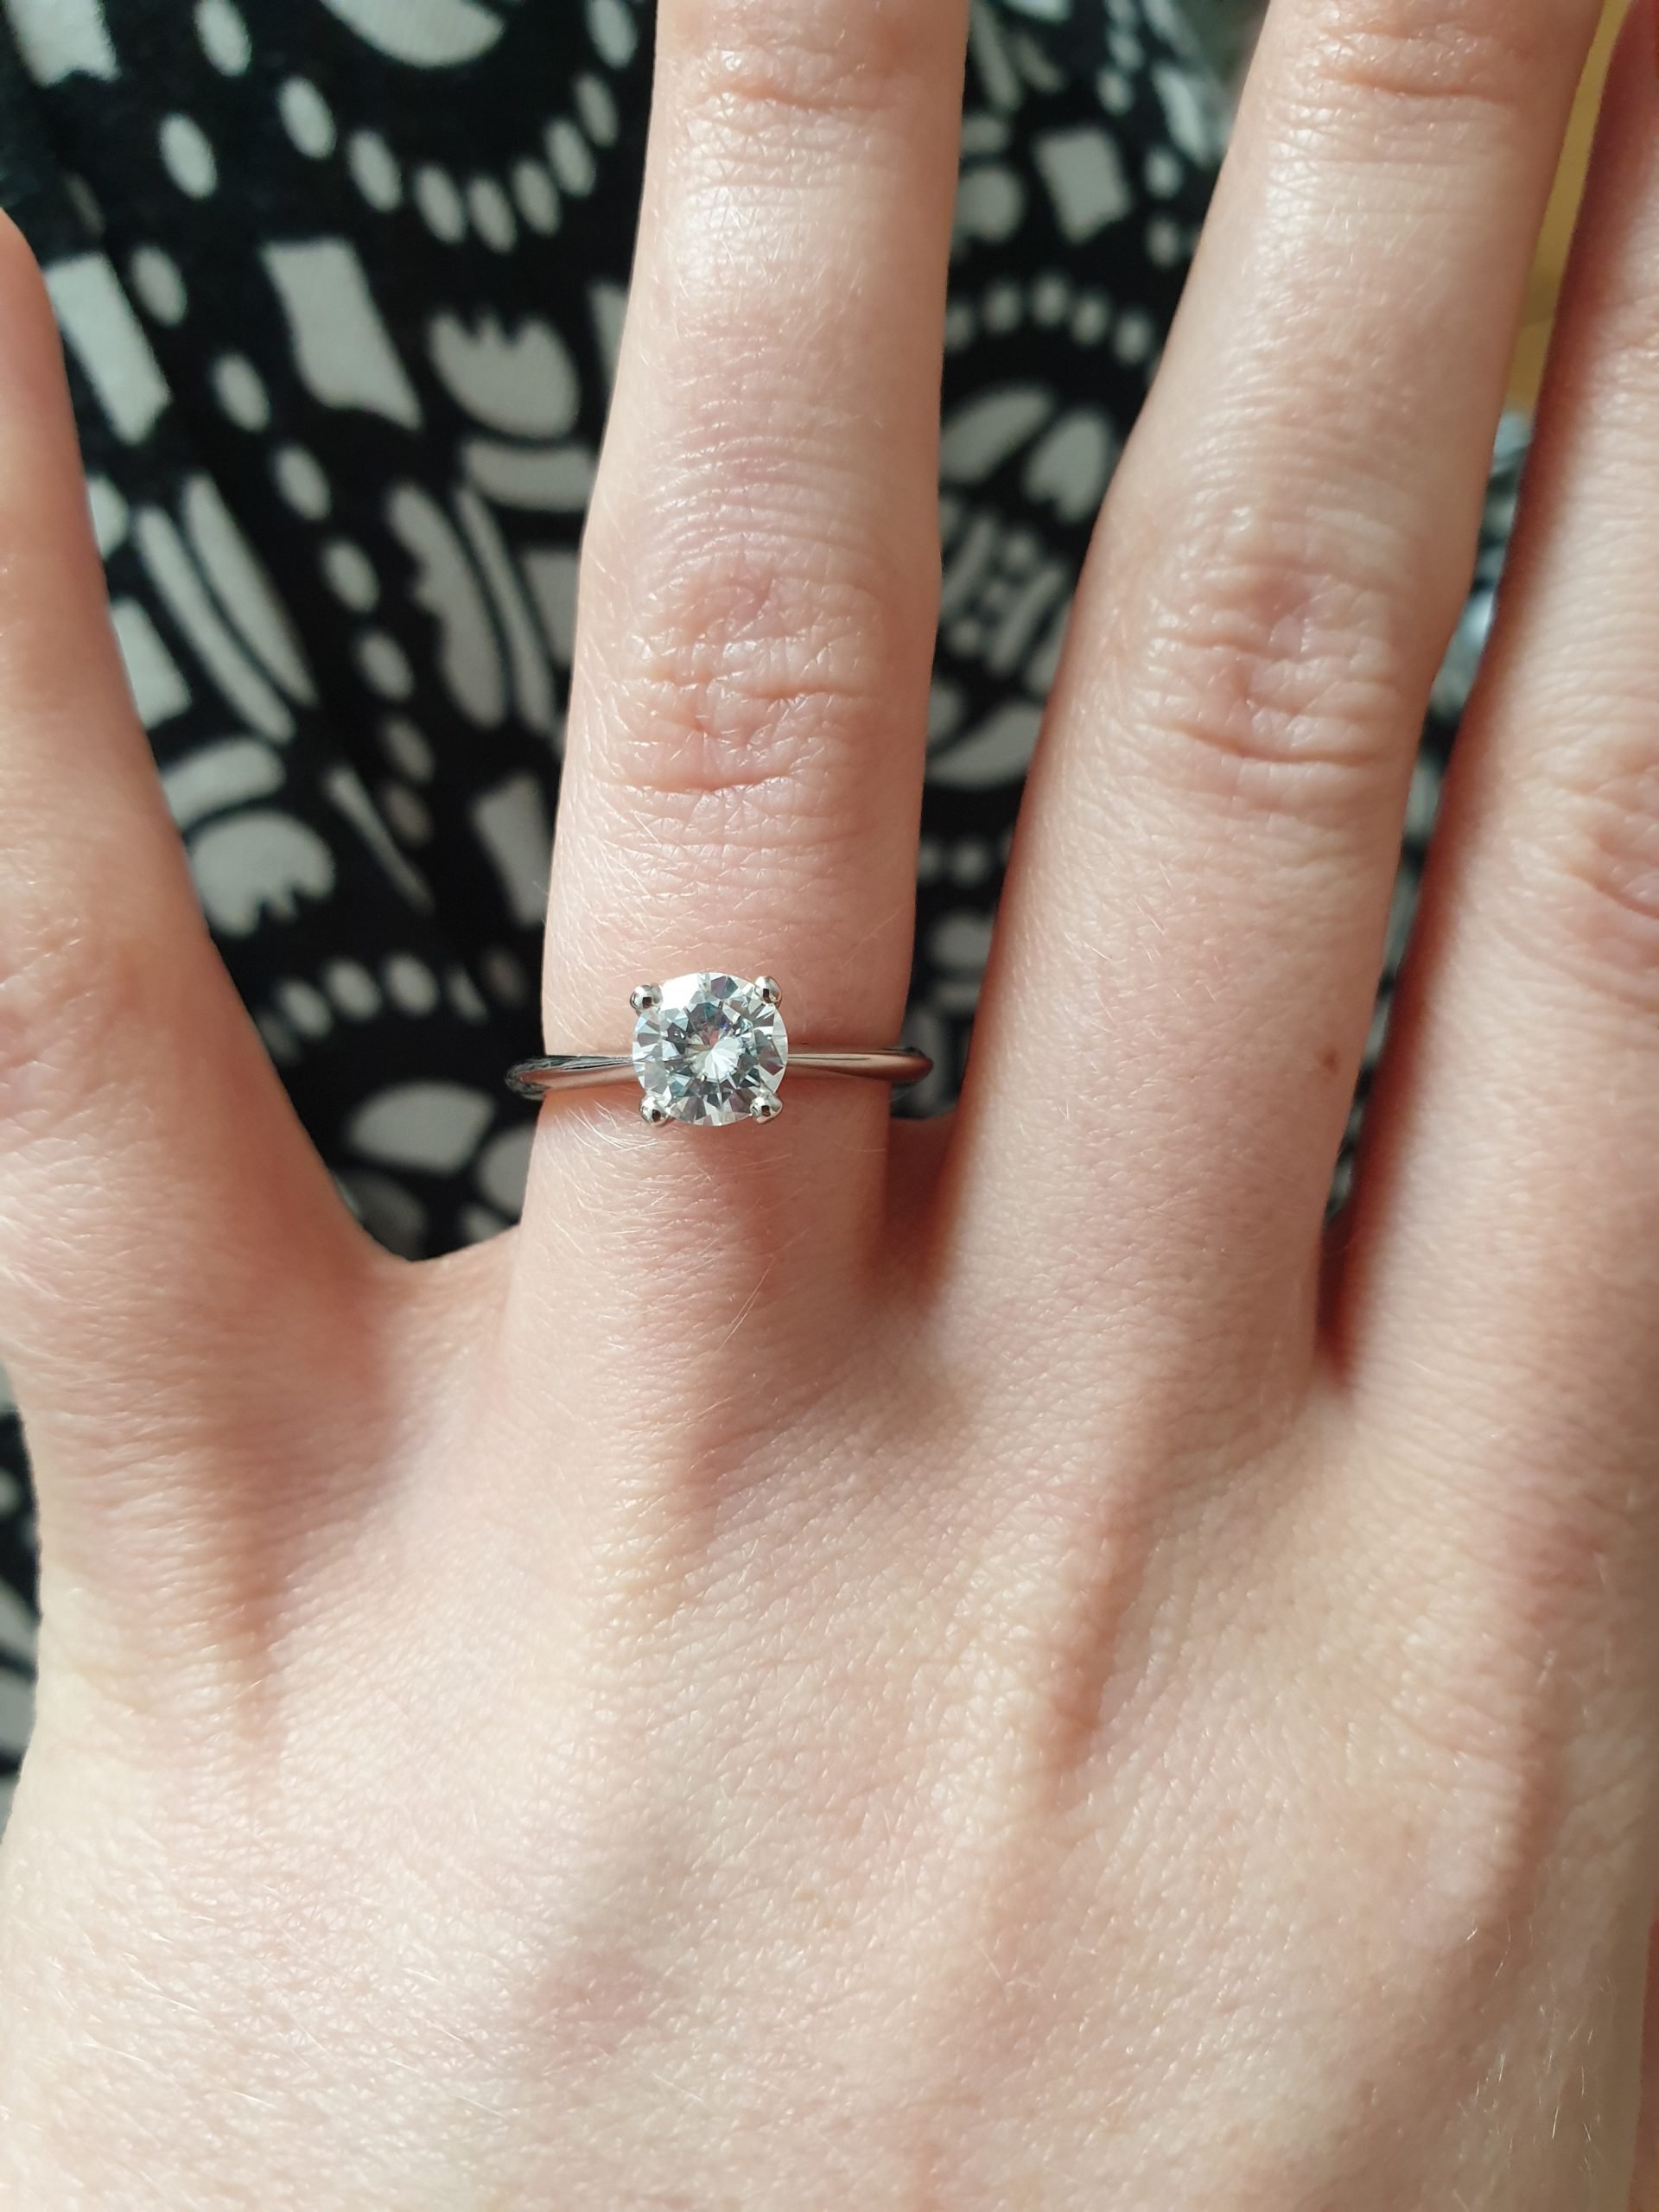 Do you wear your engagement ring all the time?